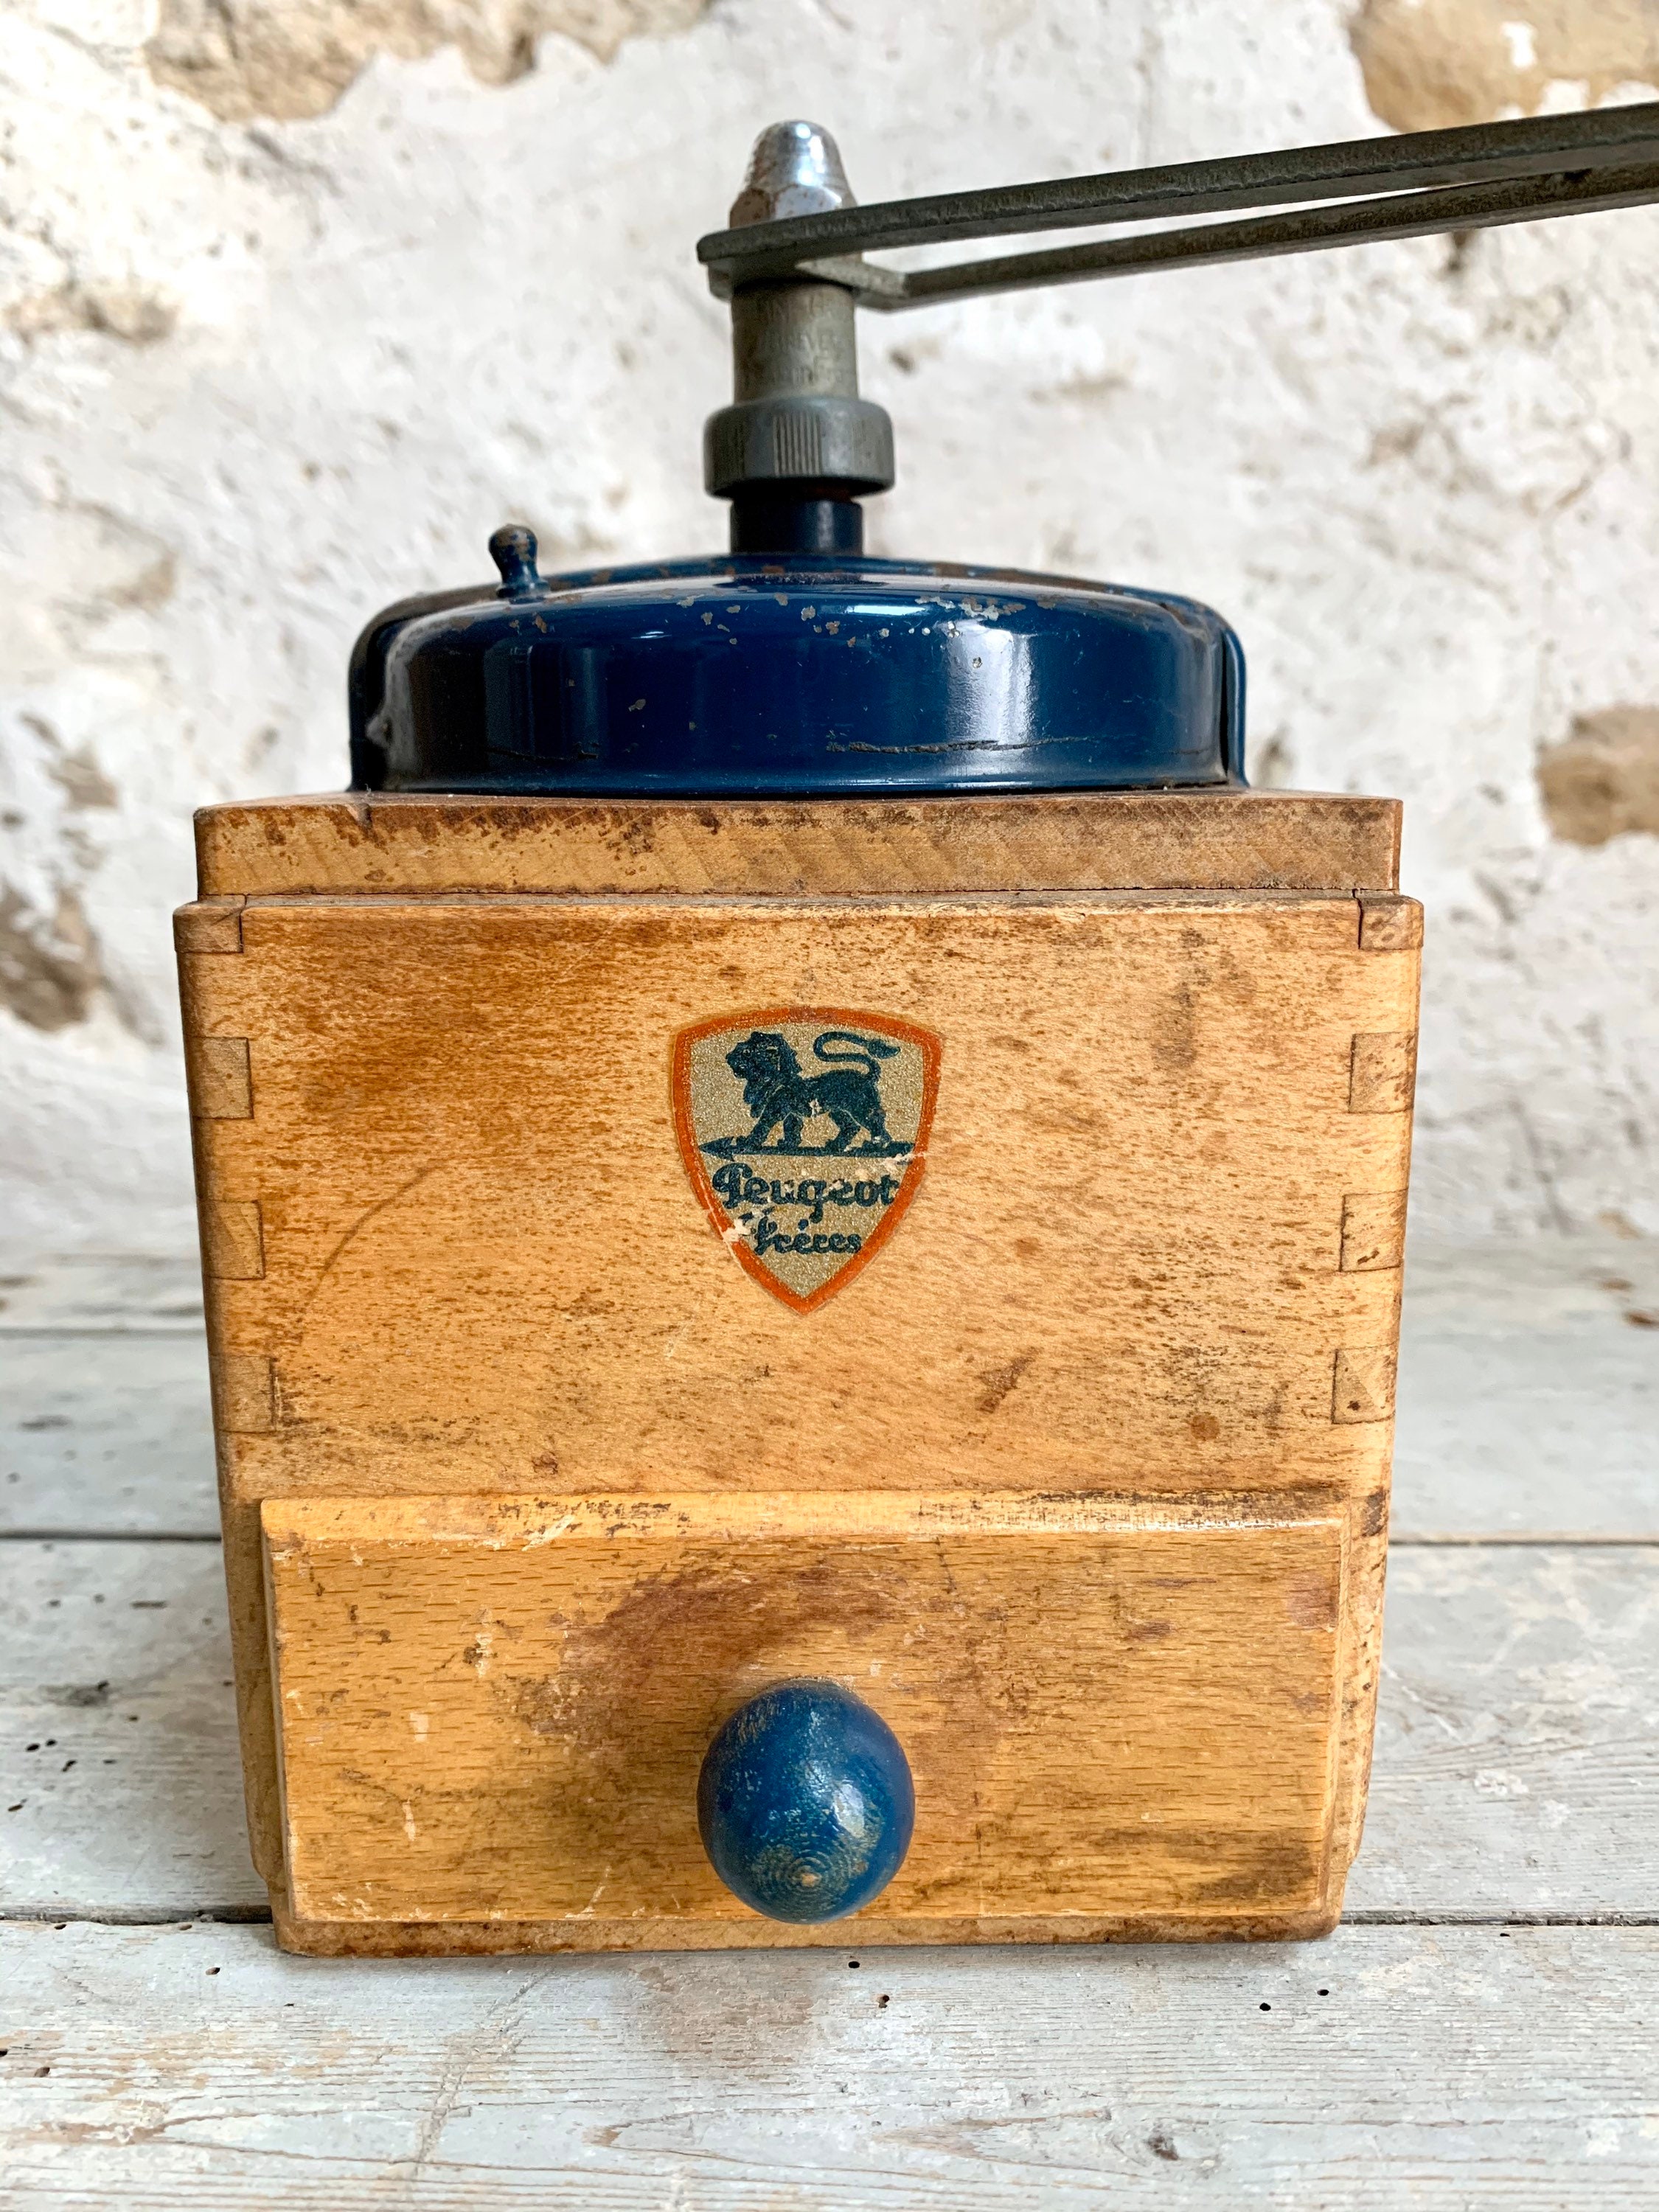 Peugeot Coffee Grinder in Stainless Steel, Made in France on Food52